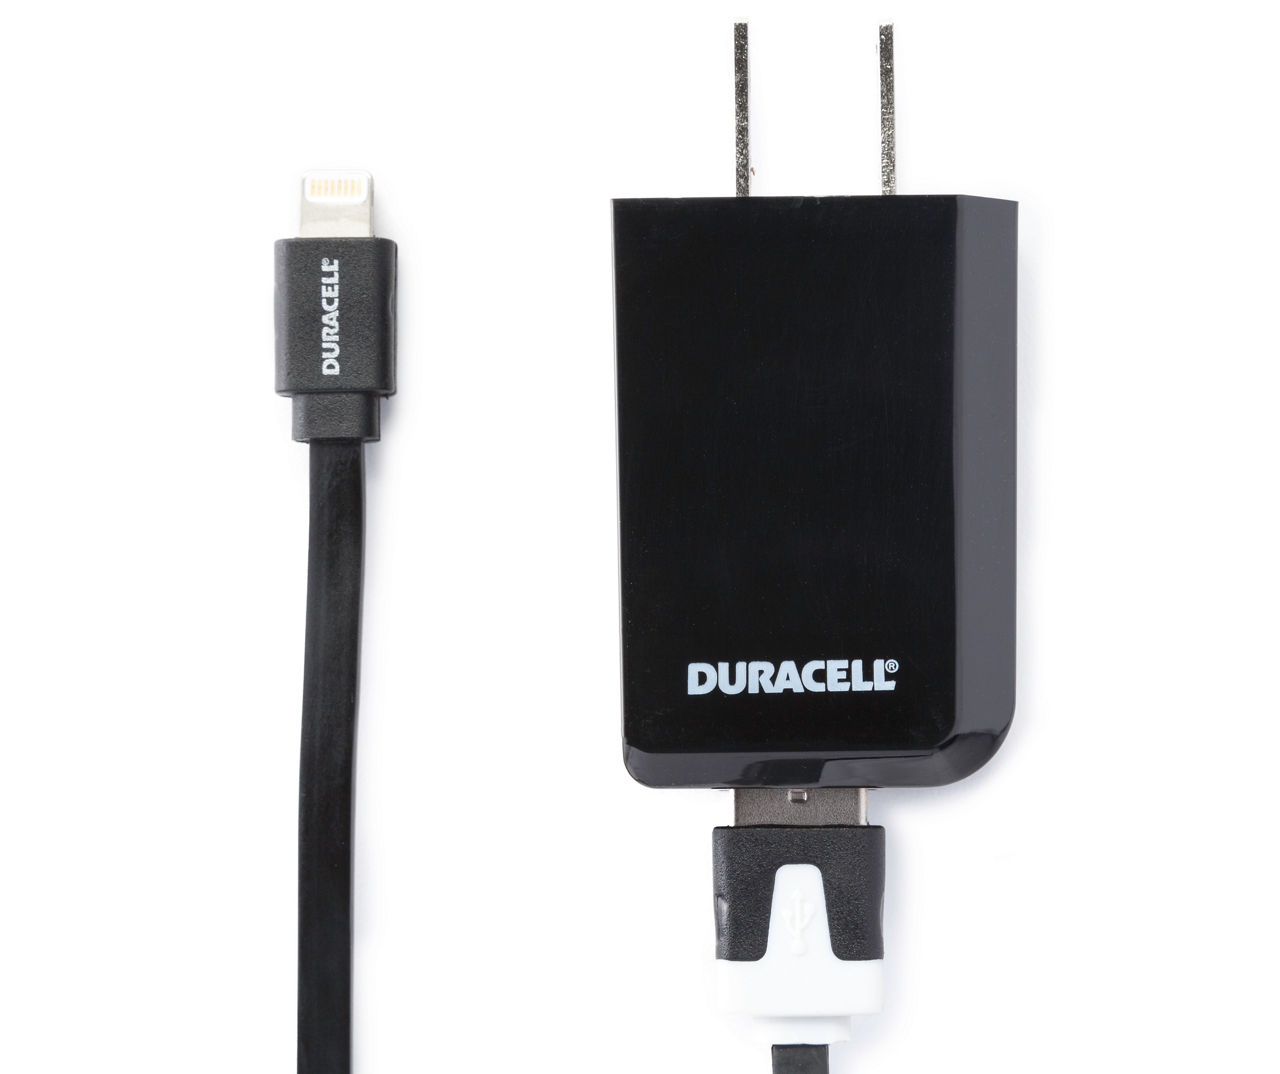 Duracell Lightning Sync & Charge USB AC Charger | Big Lots